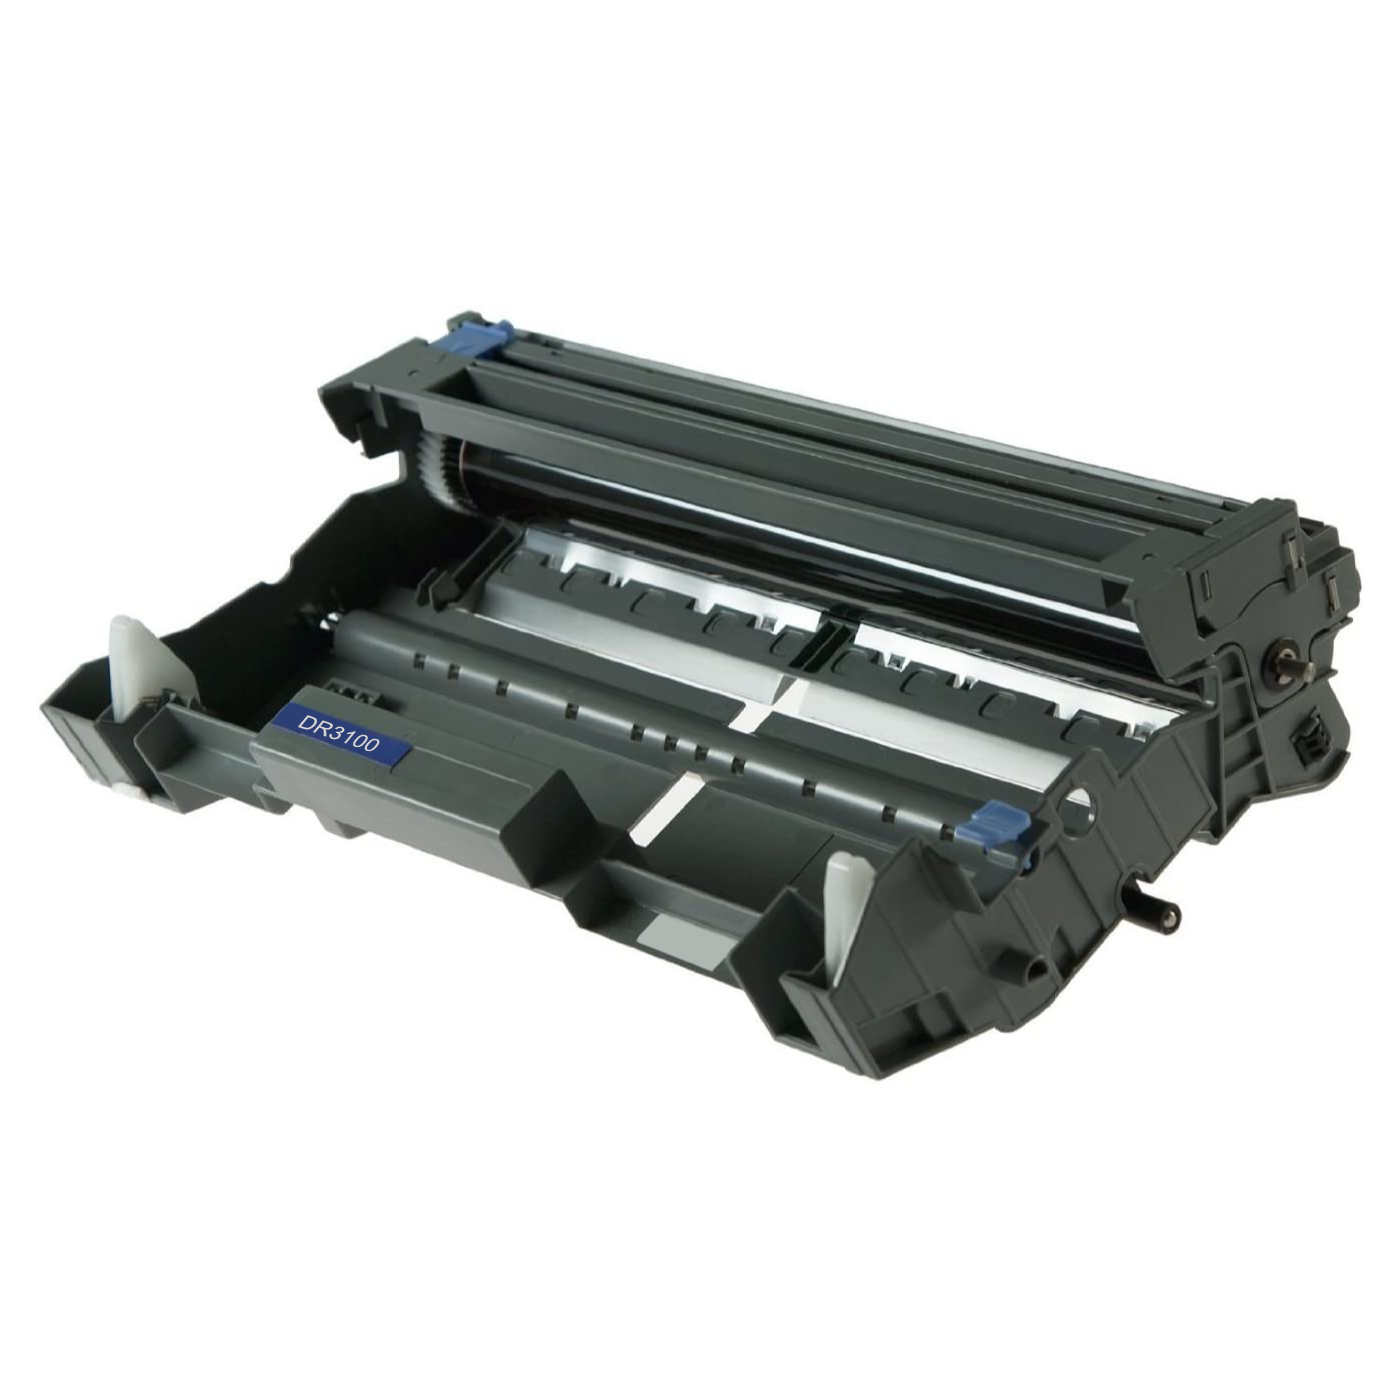 interferencia Levántate Saltar Buy Compatible Brother DCP-8060 Drum Unit | INKredible UK